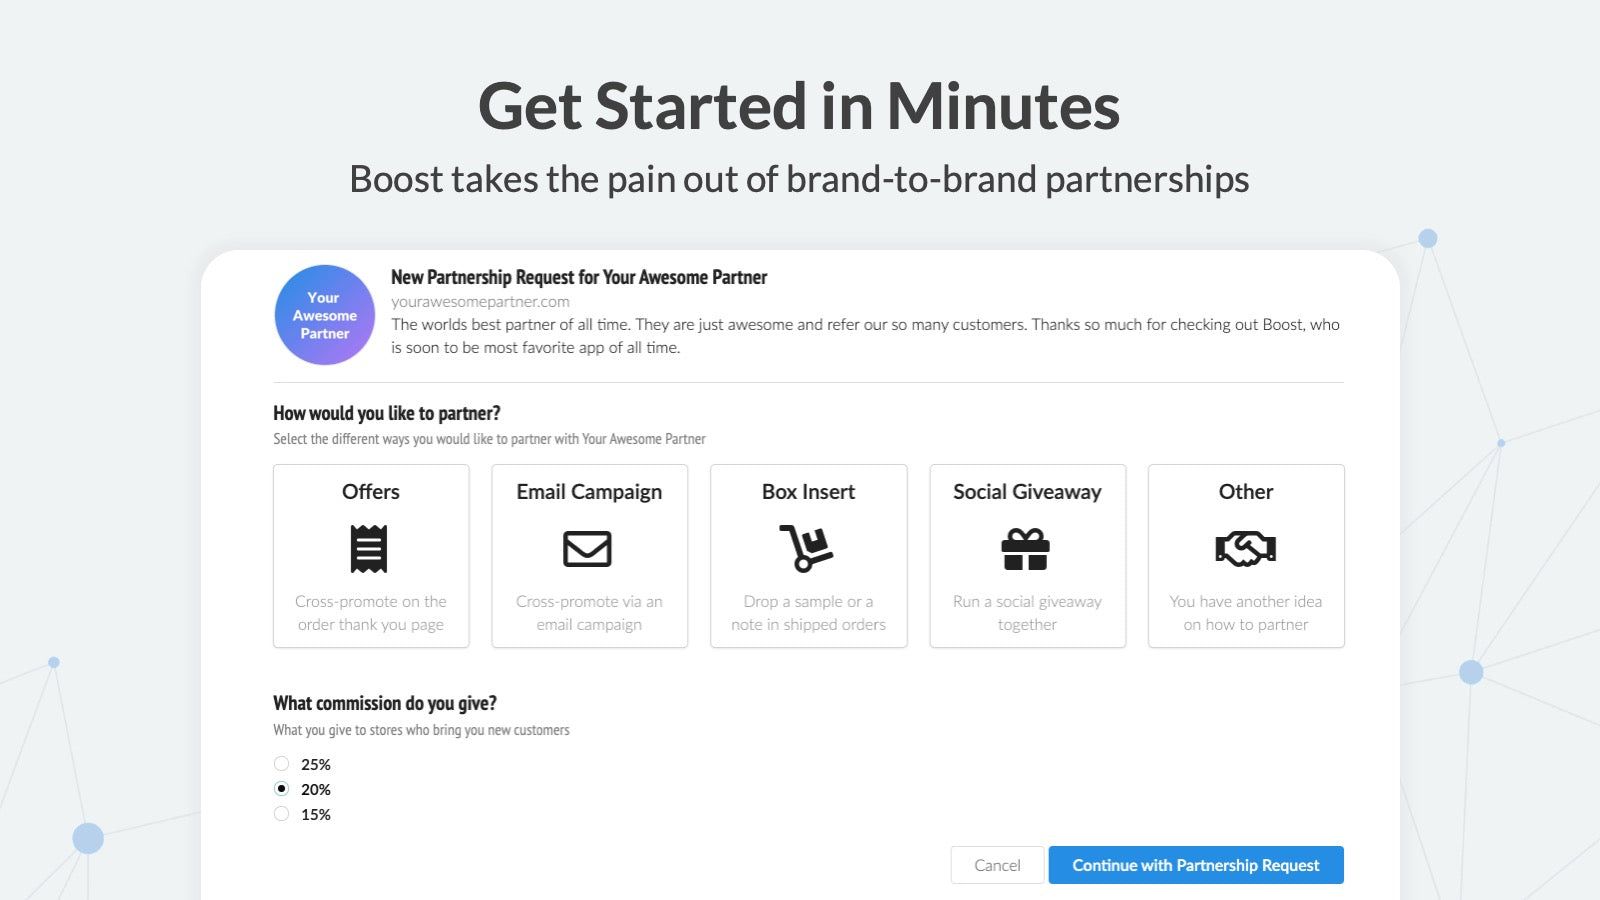 Boost takes the pain out of brand-to-brand partnerships